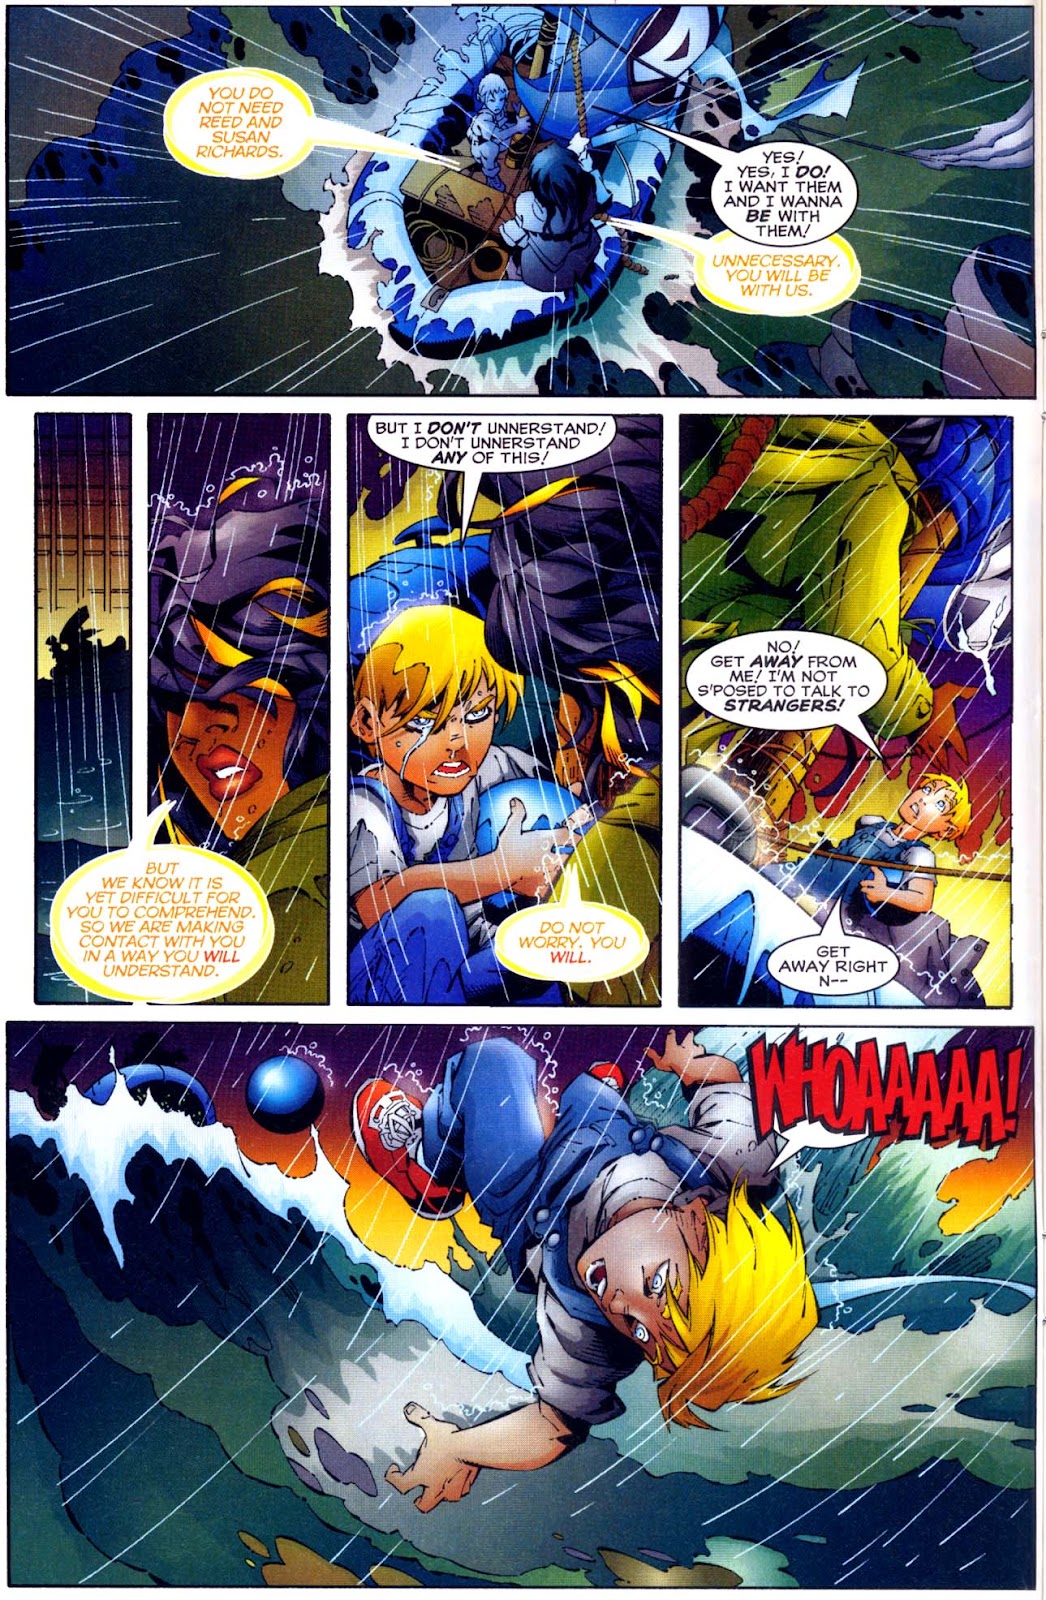 Heroes Reborn: The Return issue 1 - Page 9